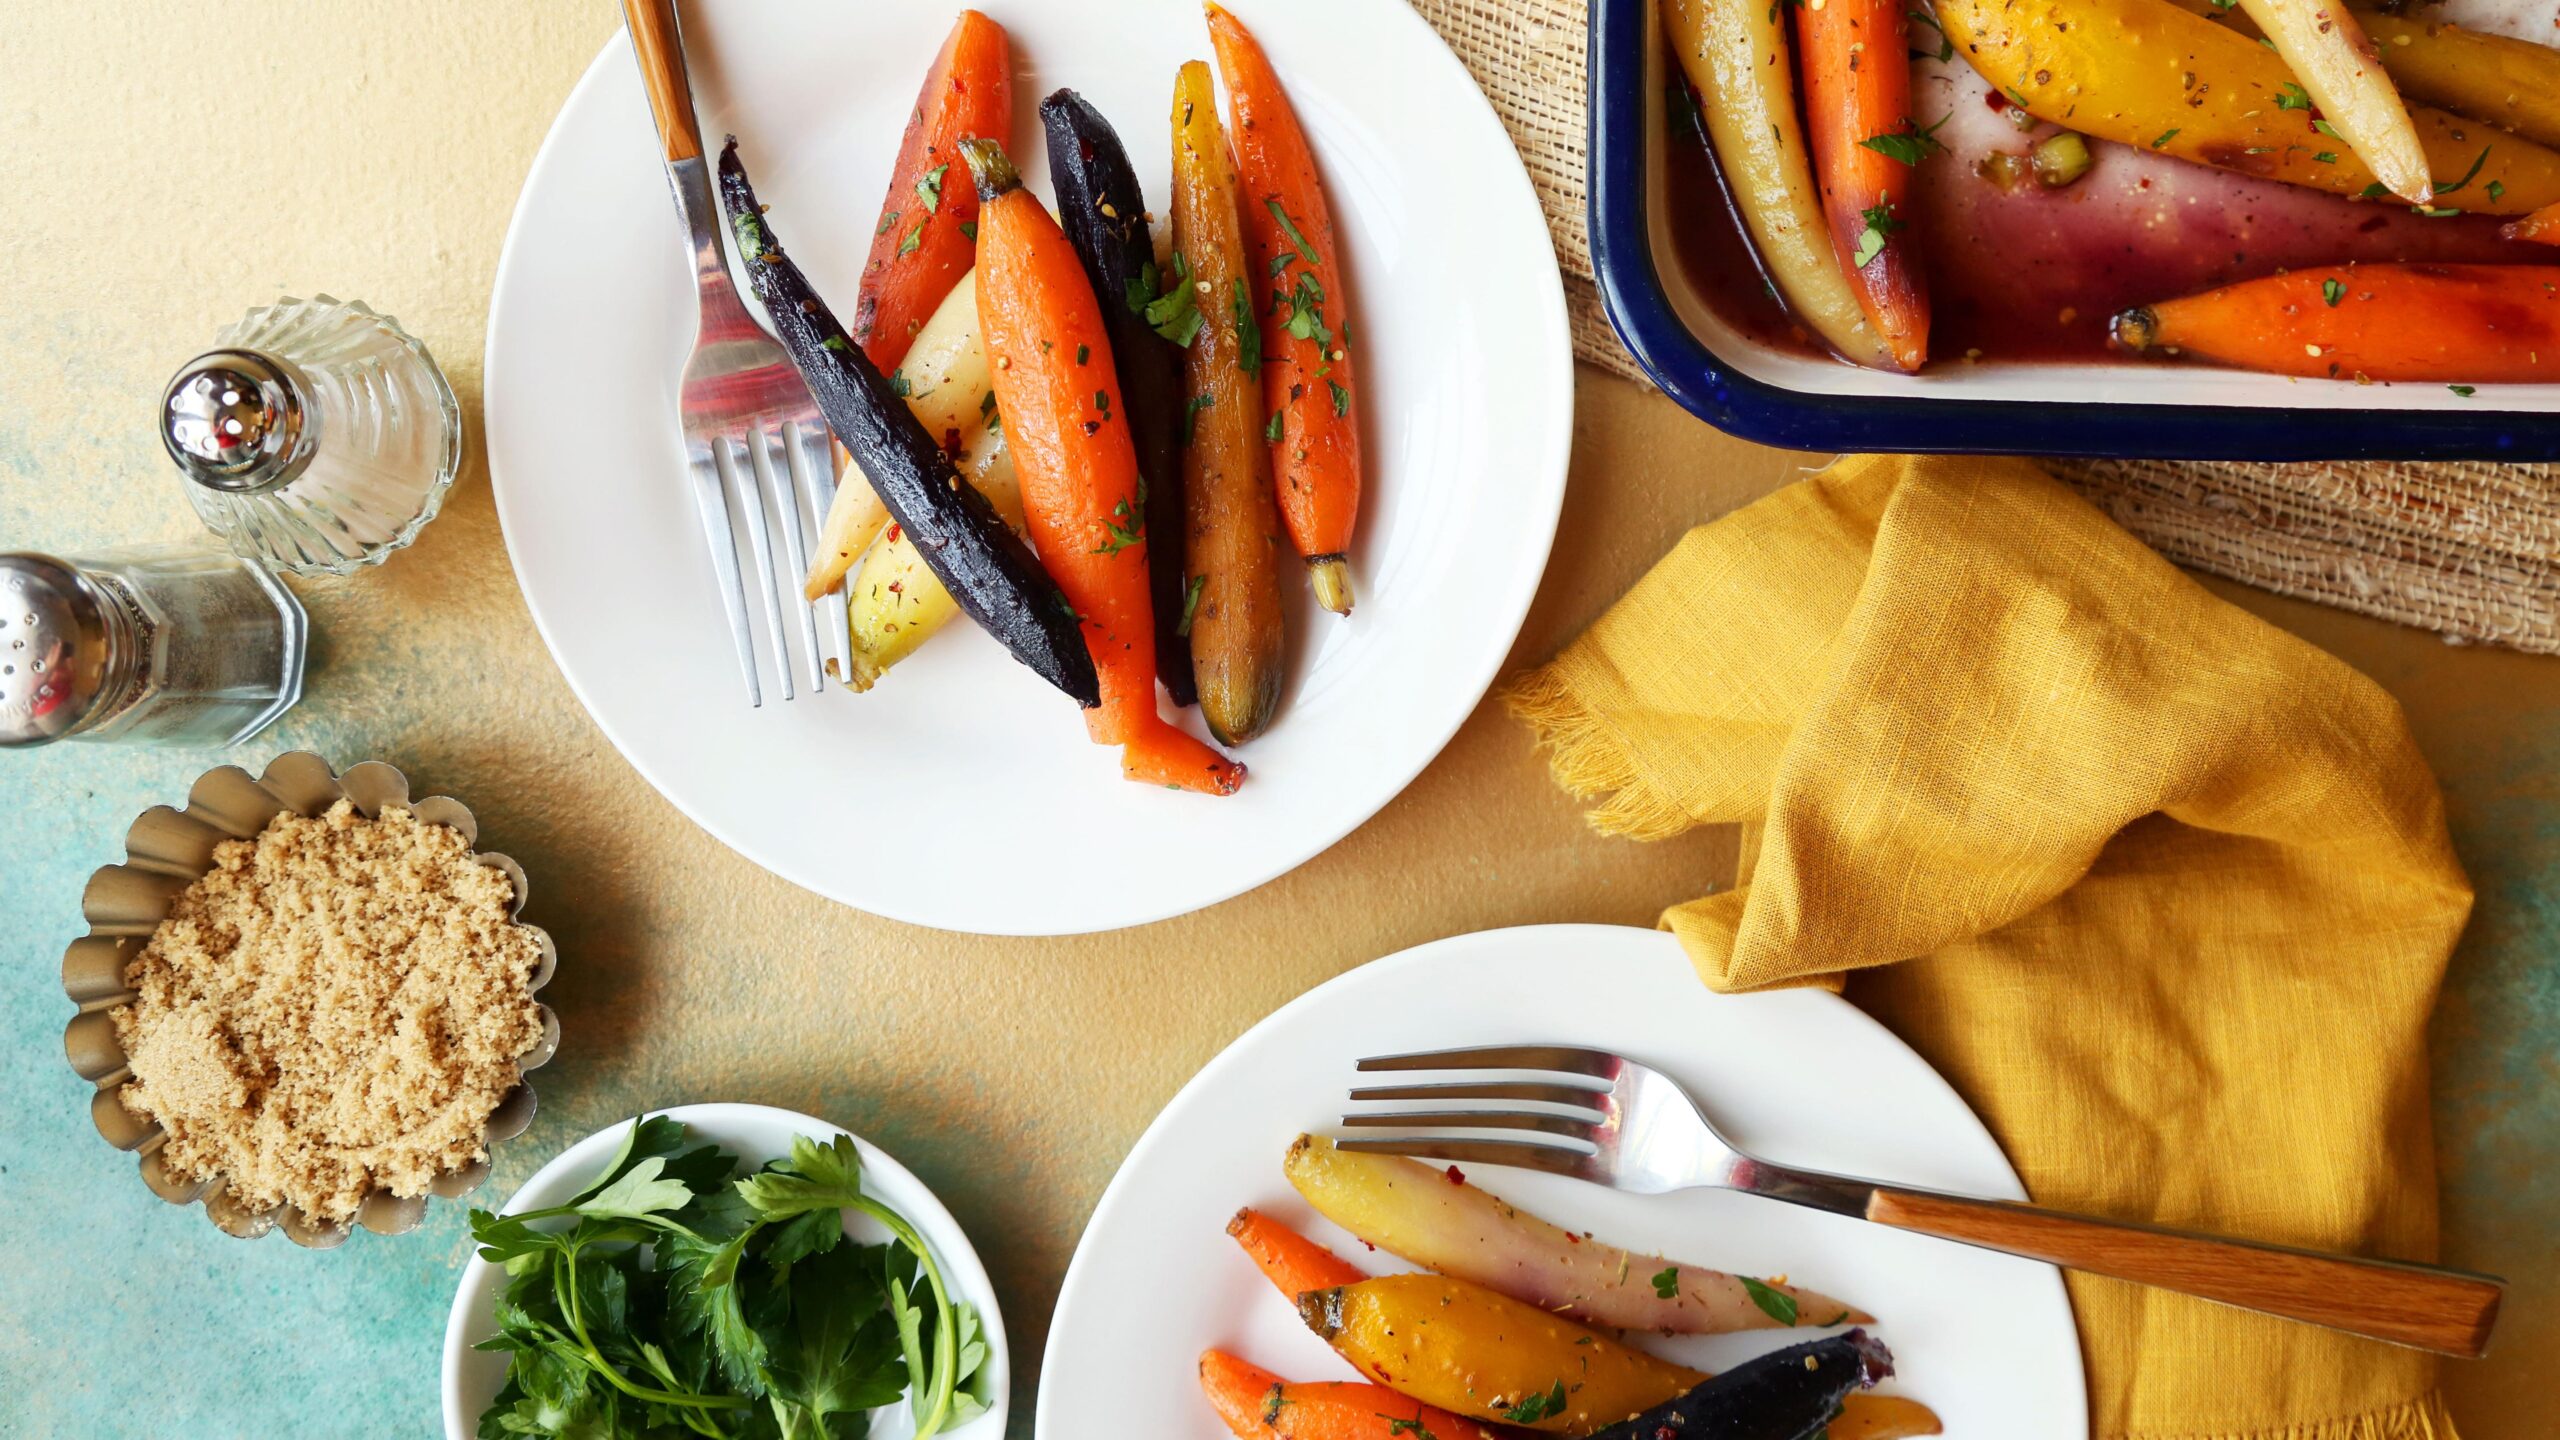  Vibrant colors and mouth-watering aroma—these honey roasted carrots will make your taste buds dance.